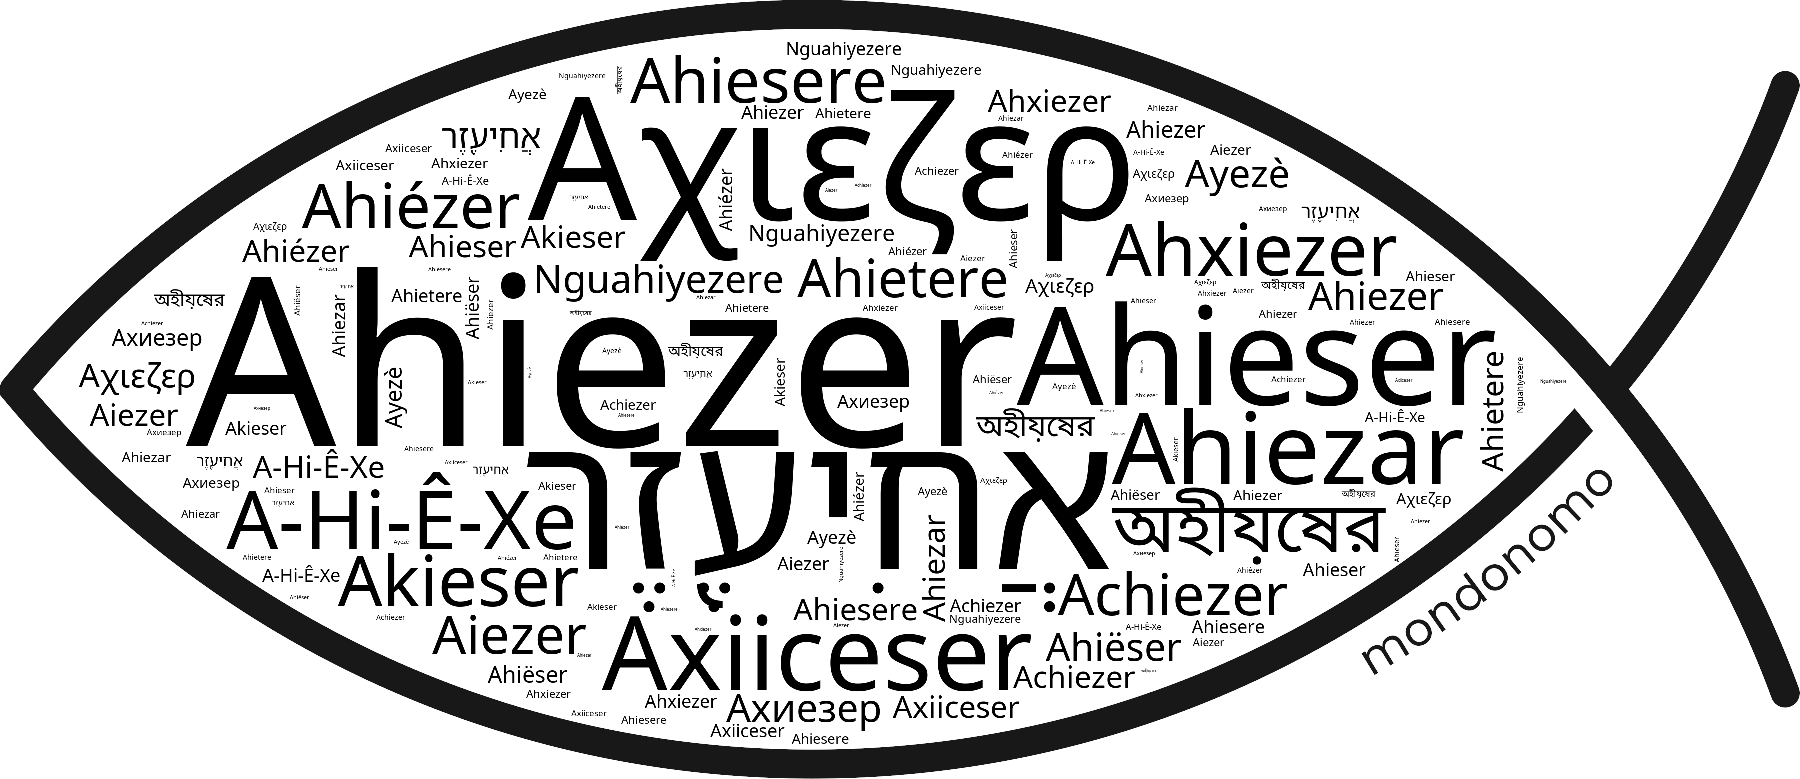 Name Ahiezer in the world's Bibles